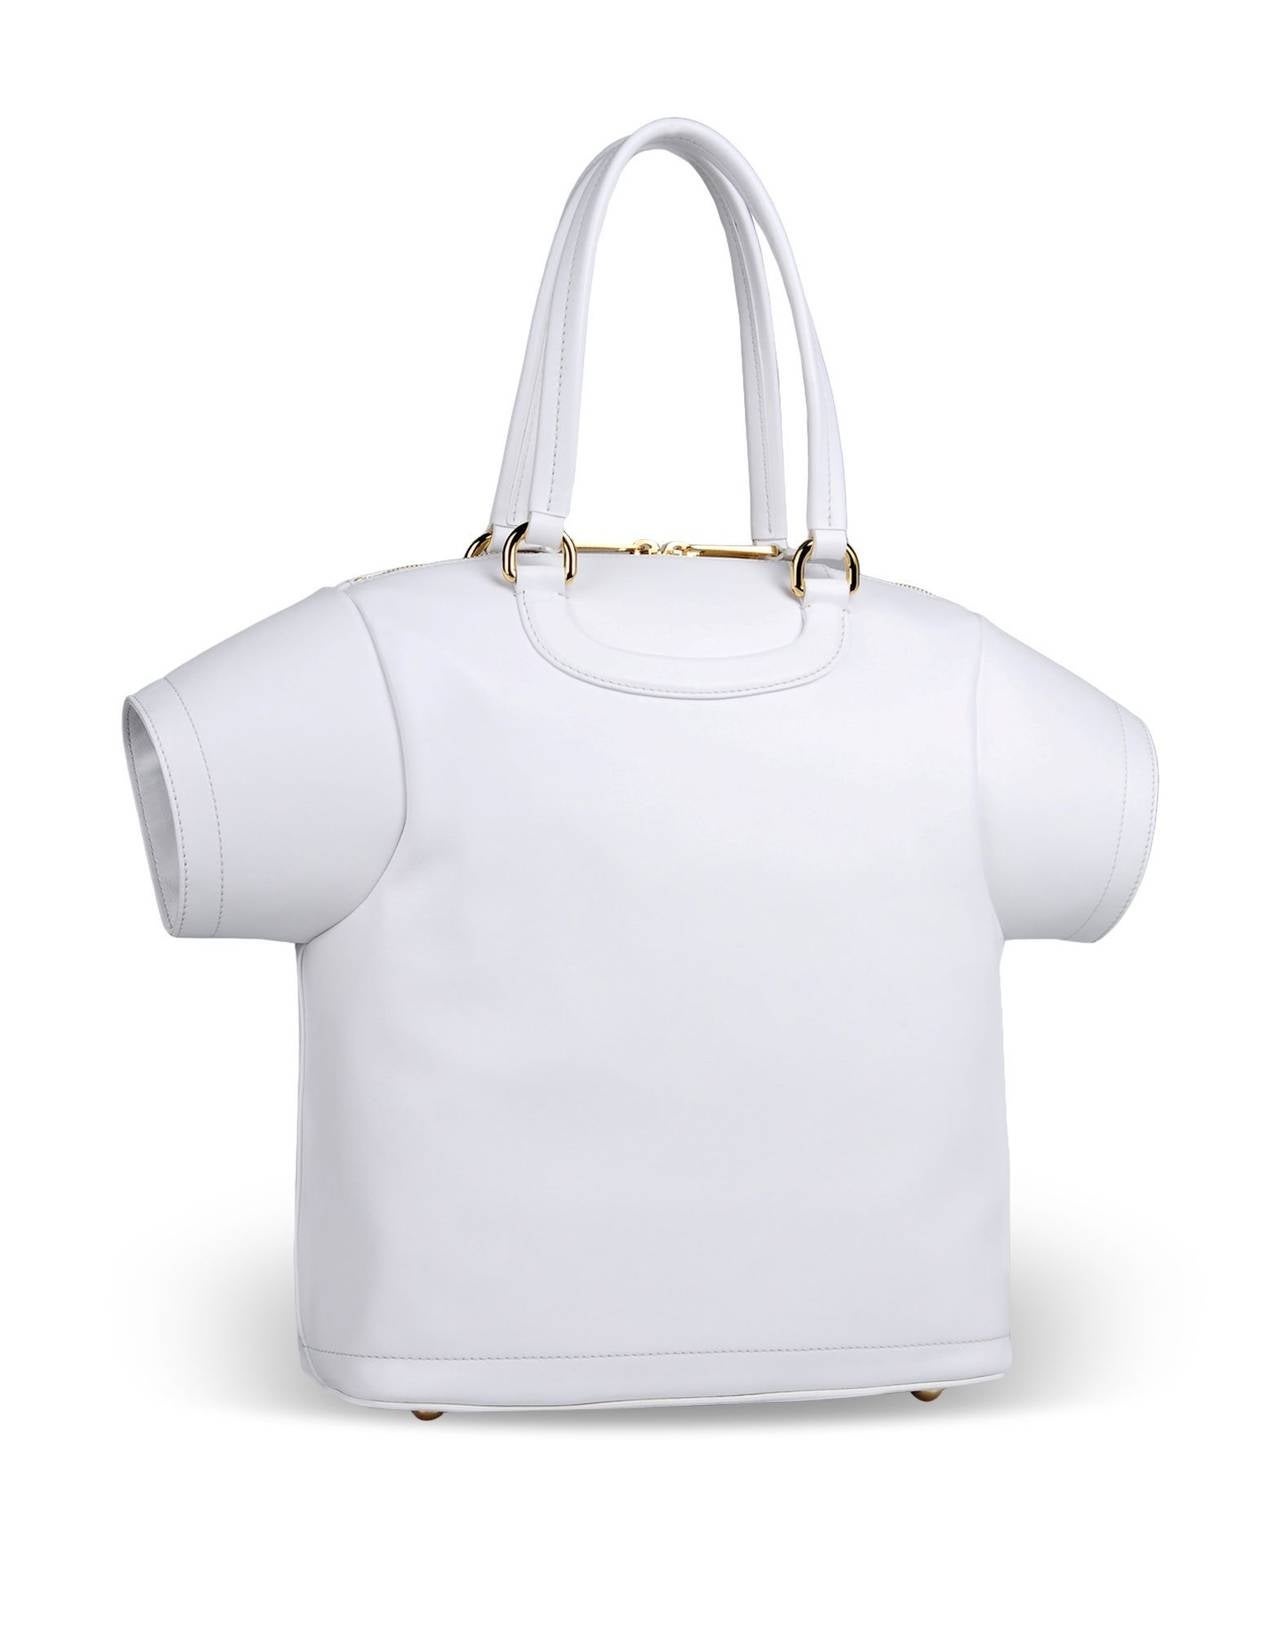 Brand new bag from Moschino. White leather handbag with 